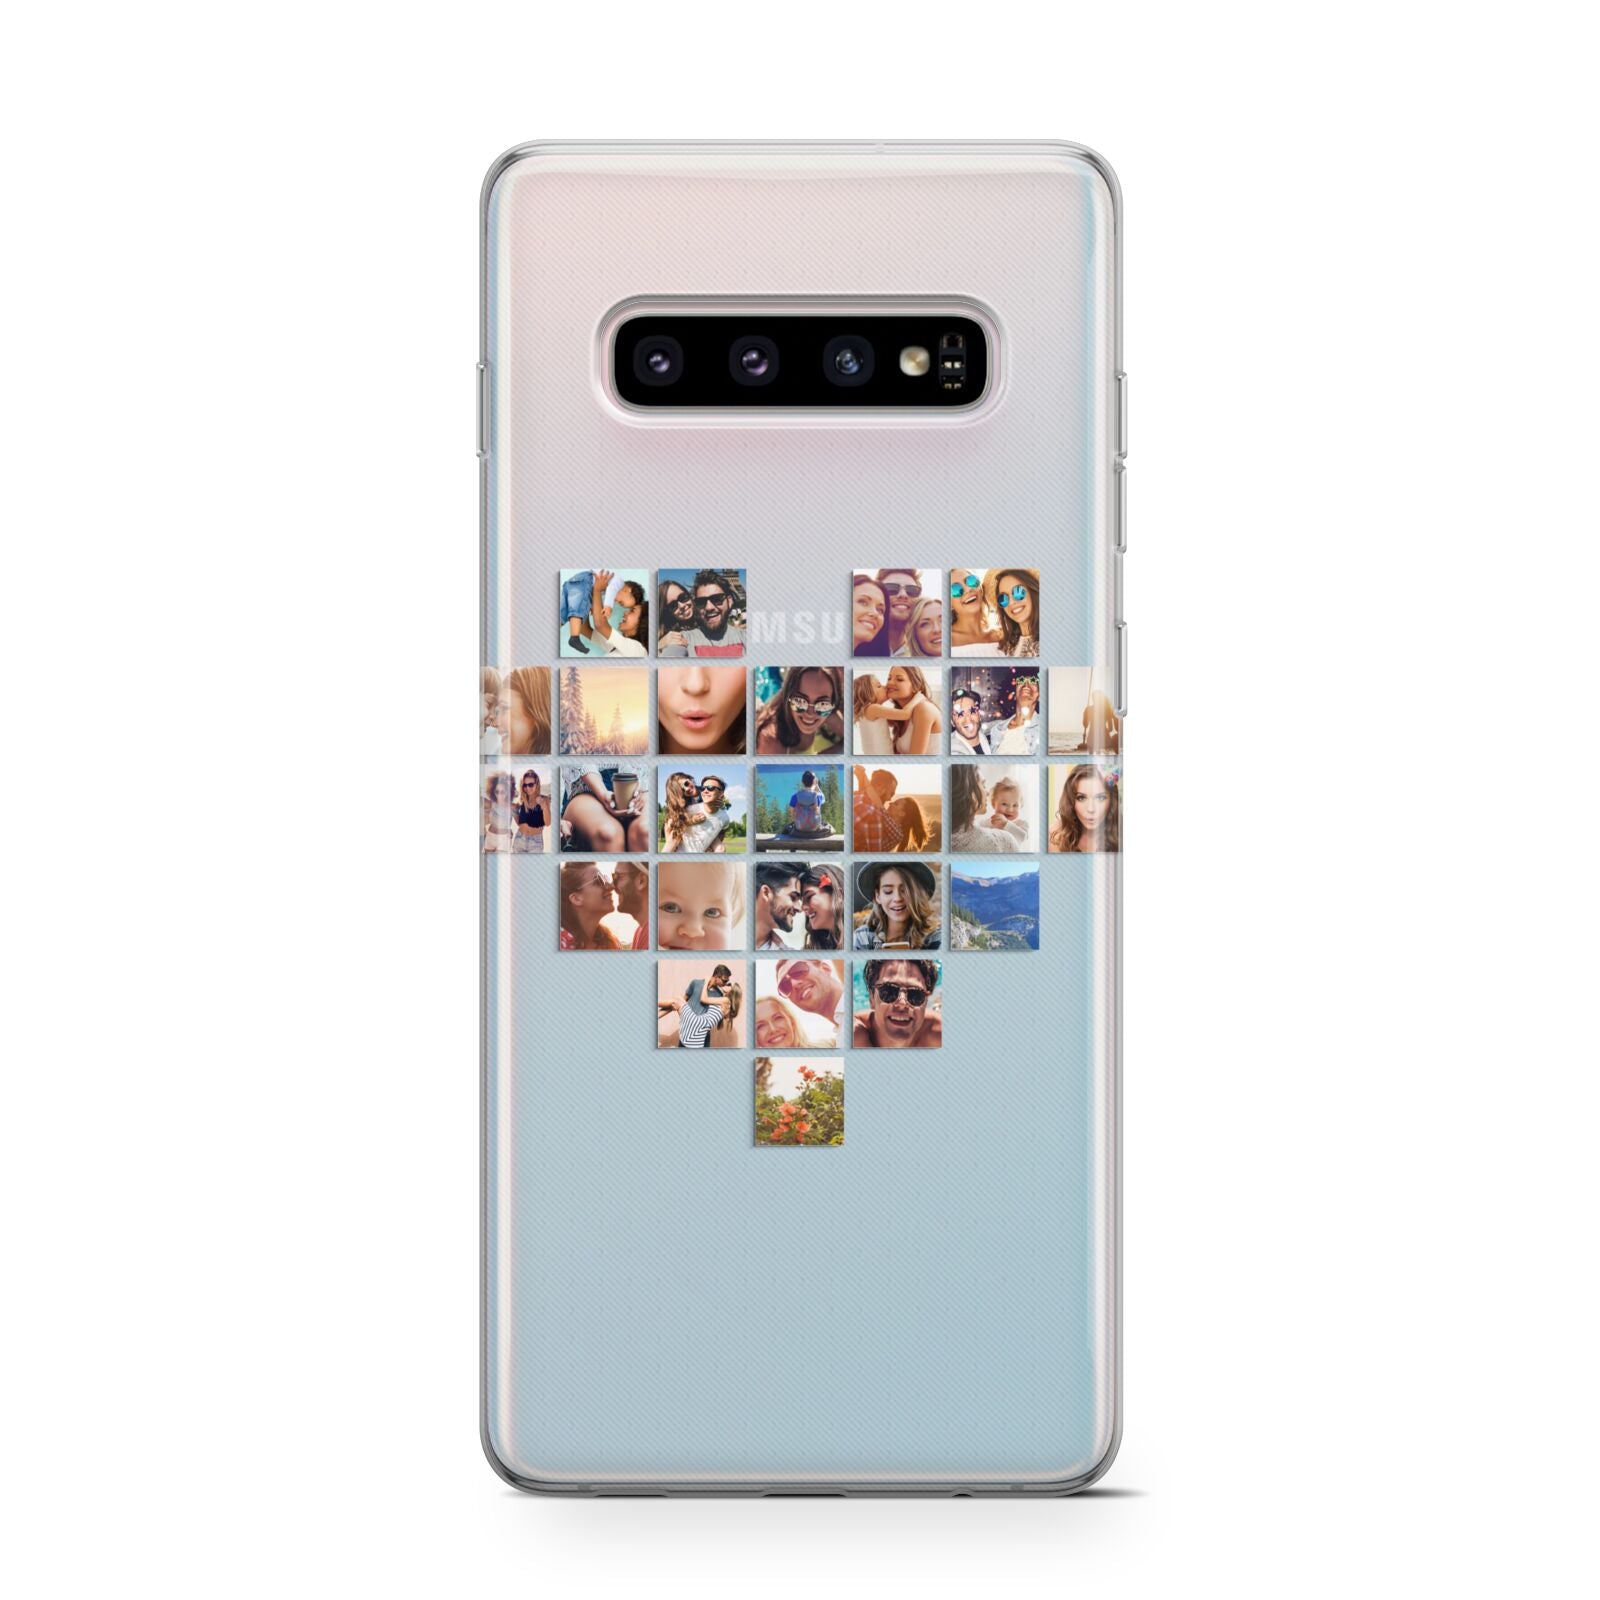 Large Heart Photo Montage Upload Samsung Galaxy S10 Case